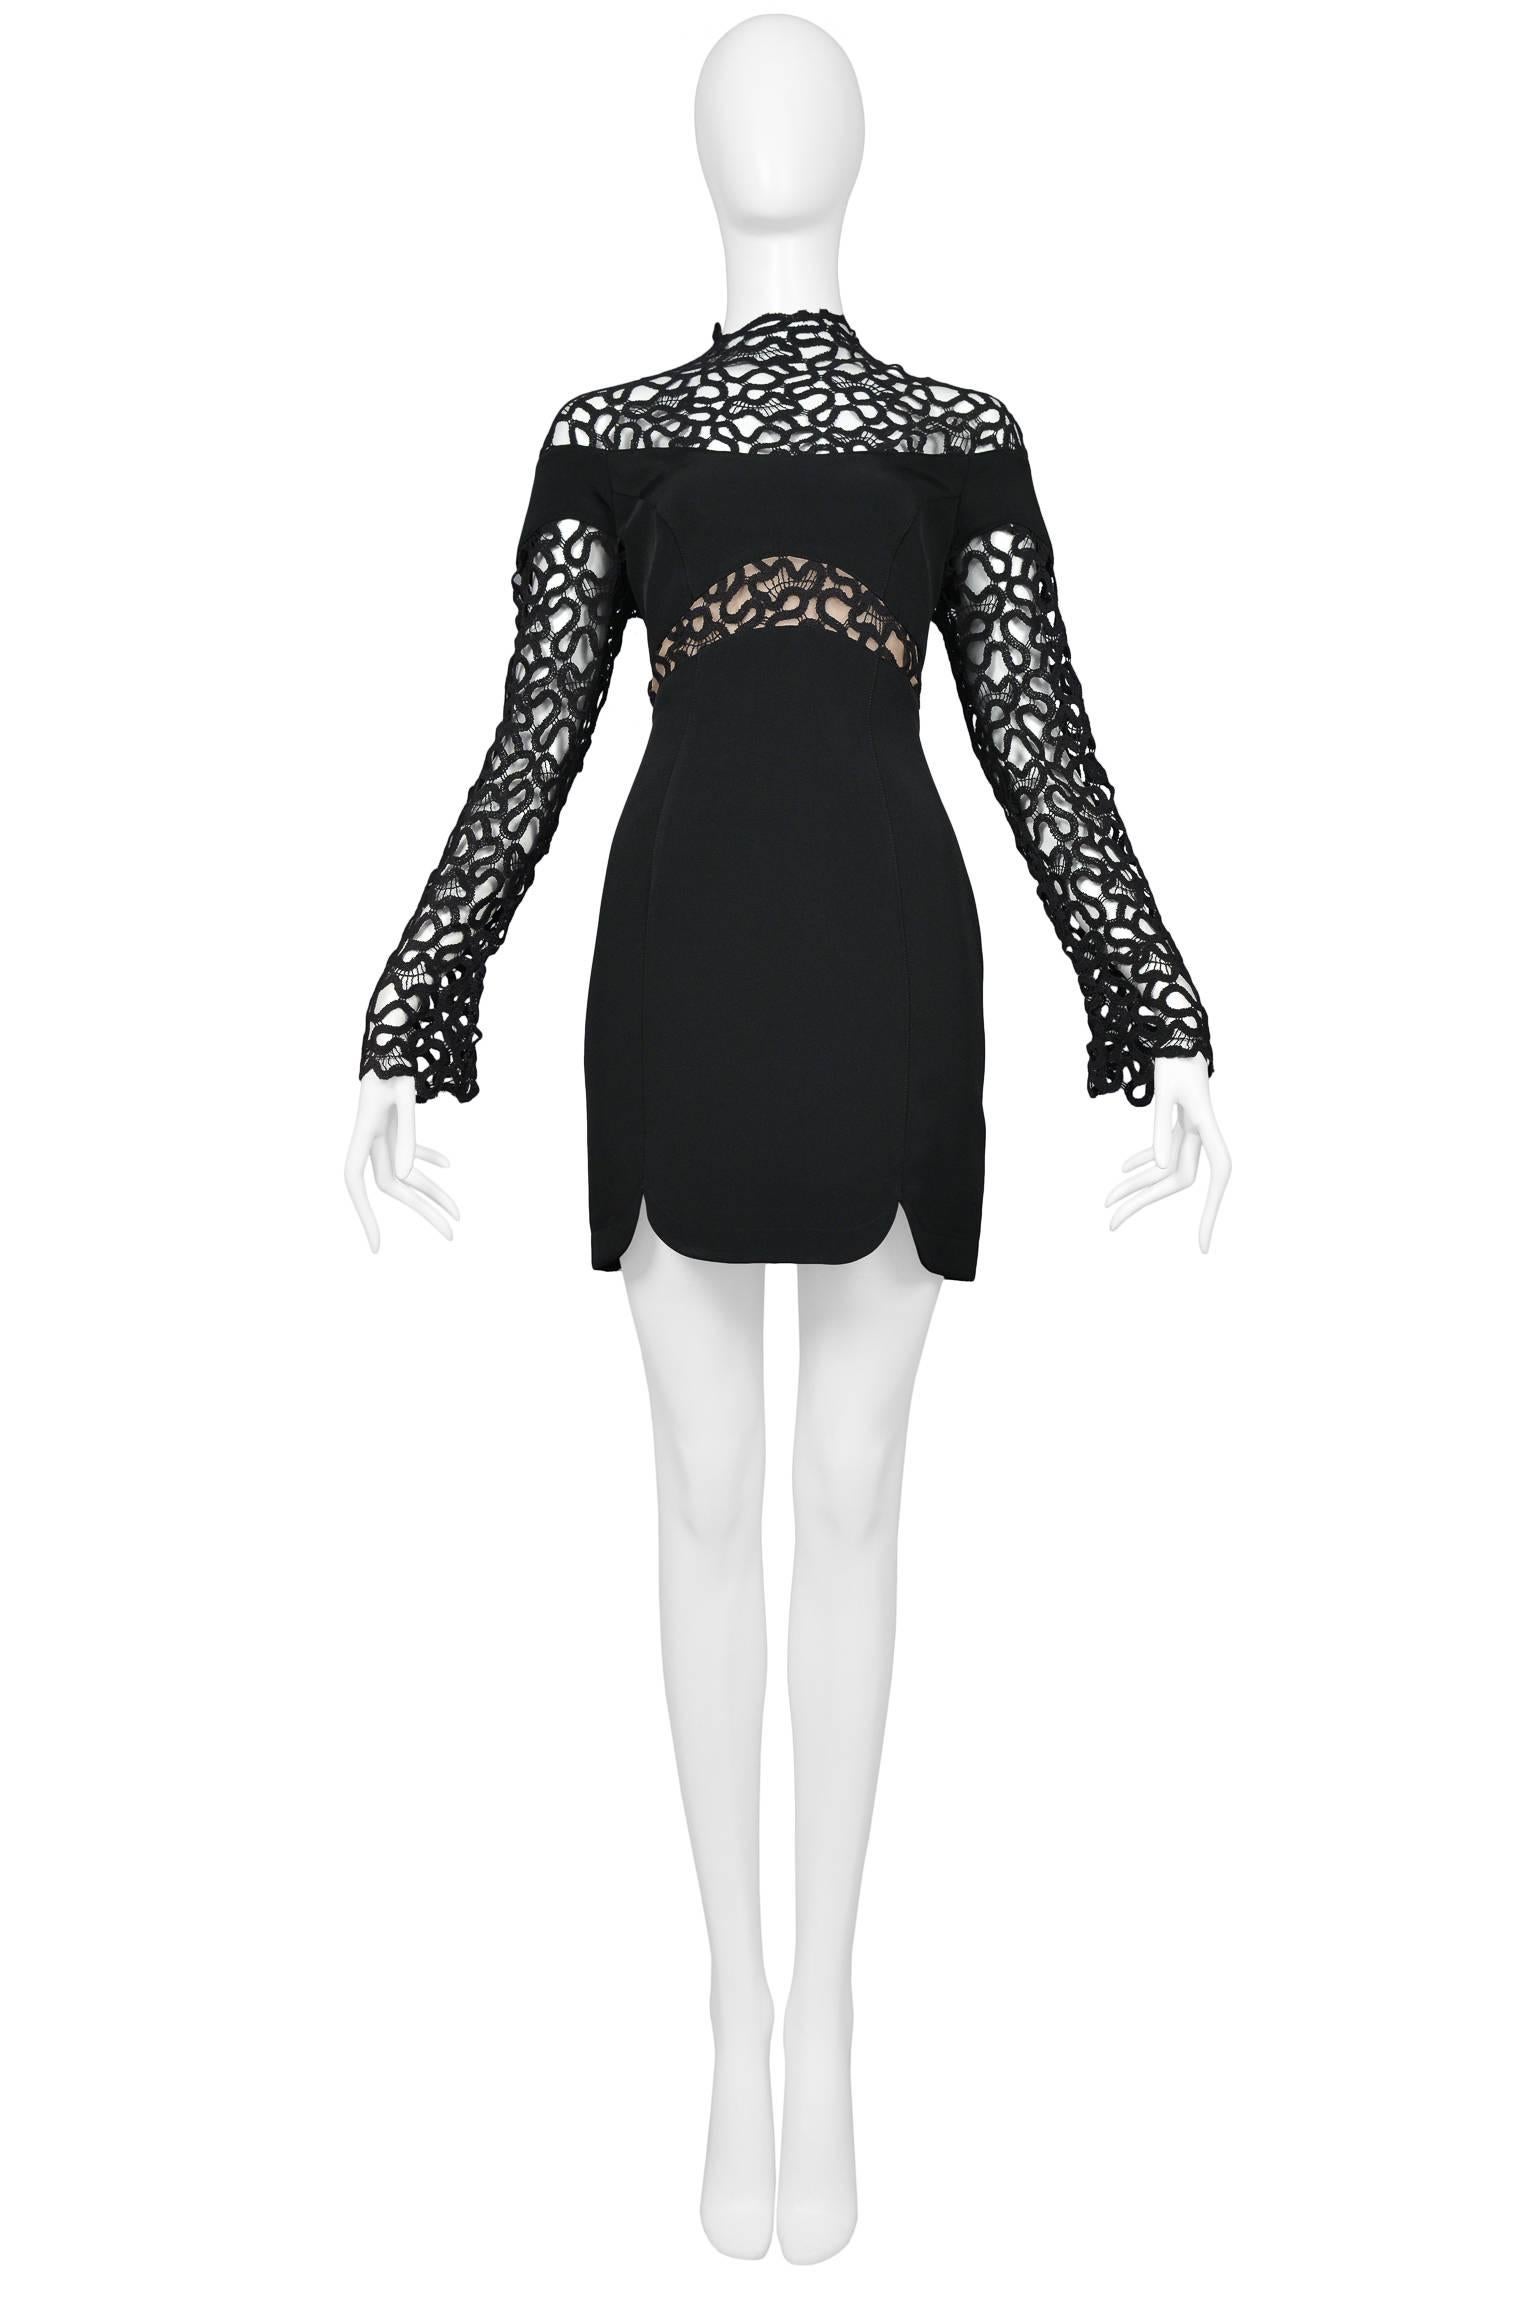 Thierry Mugler black squiggle lace and solid insets mini cocktail dress. The dress features a button up back, high neck, long sleeves, and a nude panel at center front. The skirt has two notches at front sides. Fitted body.